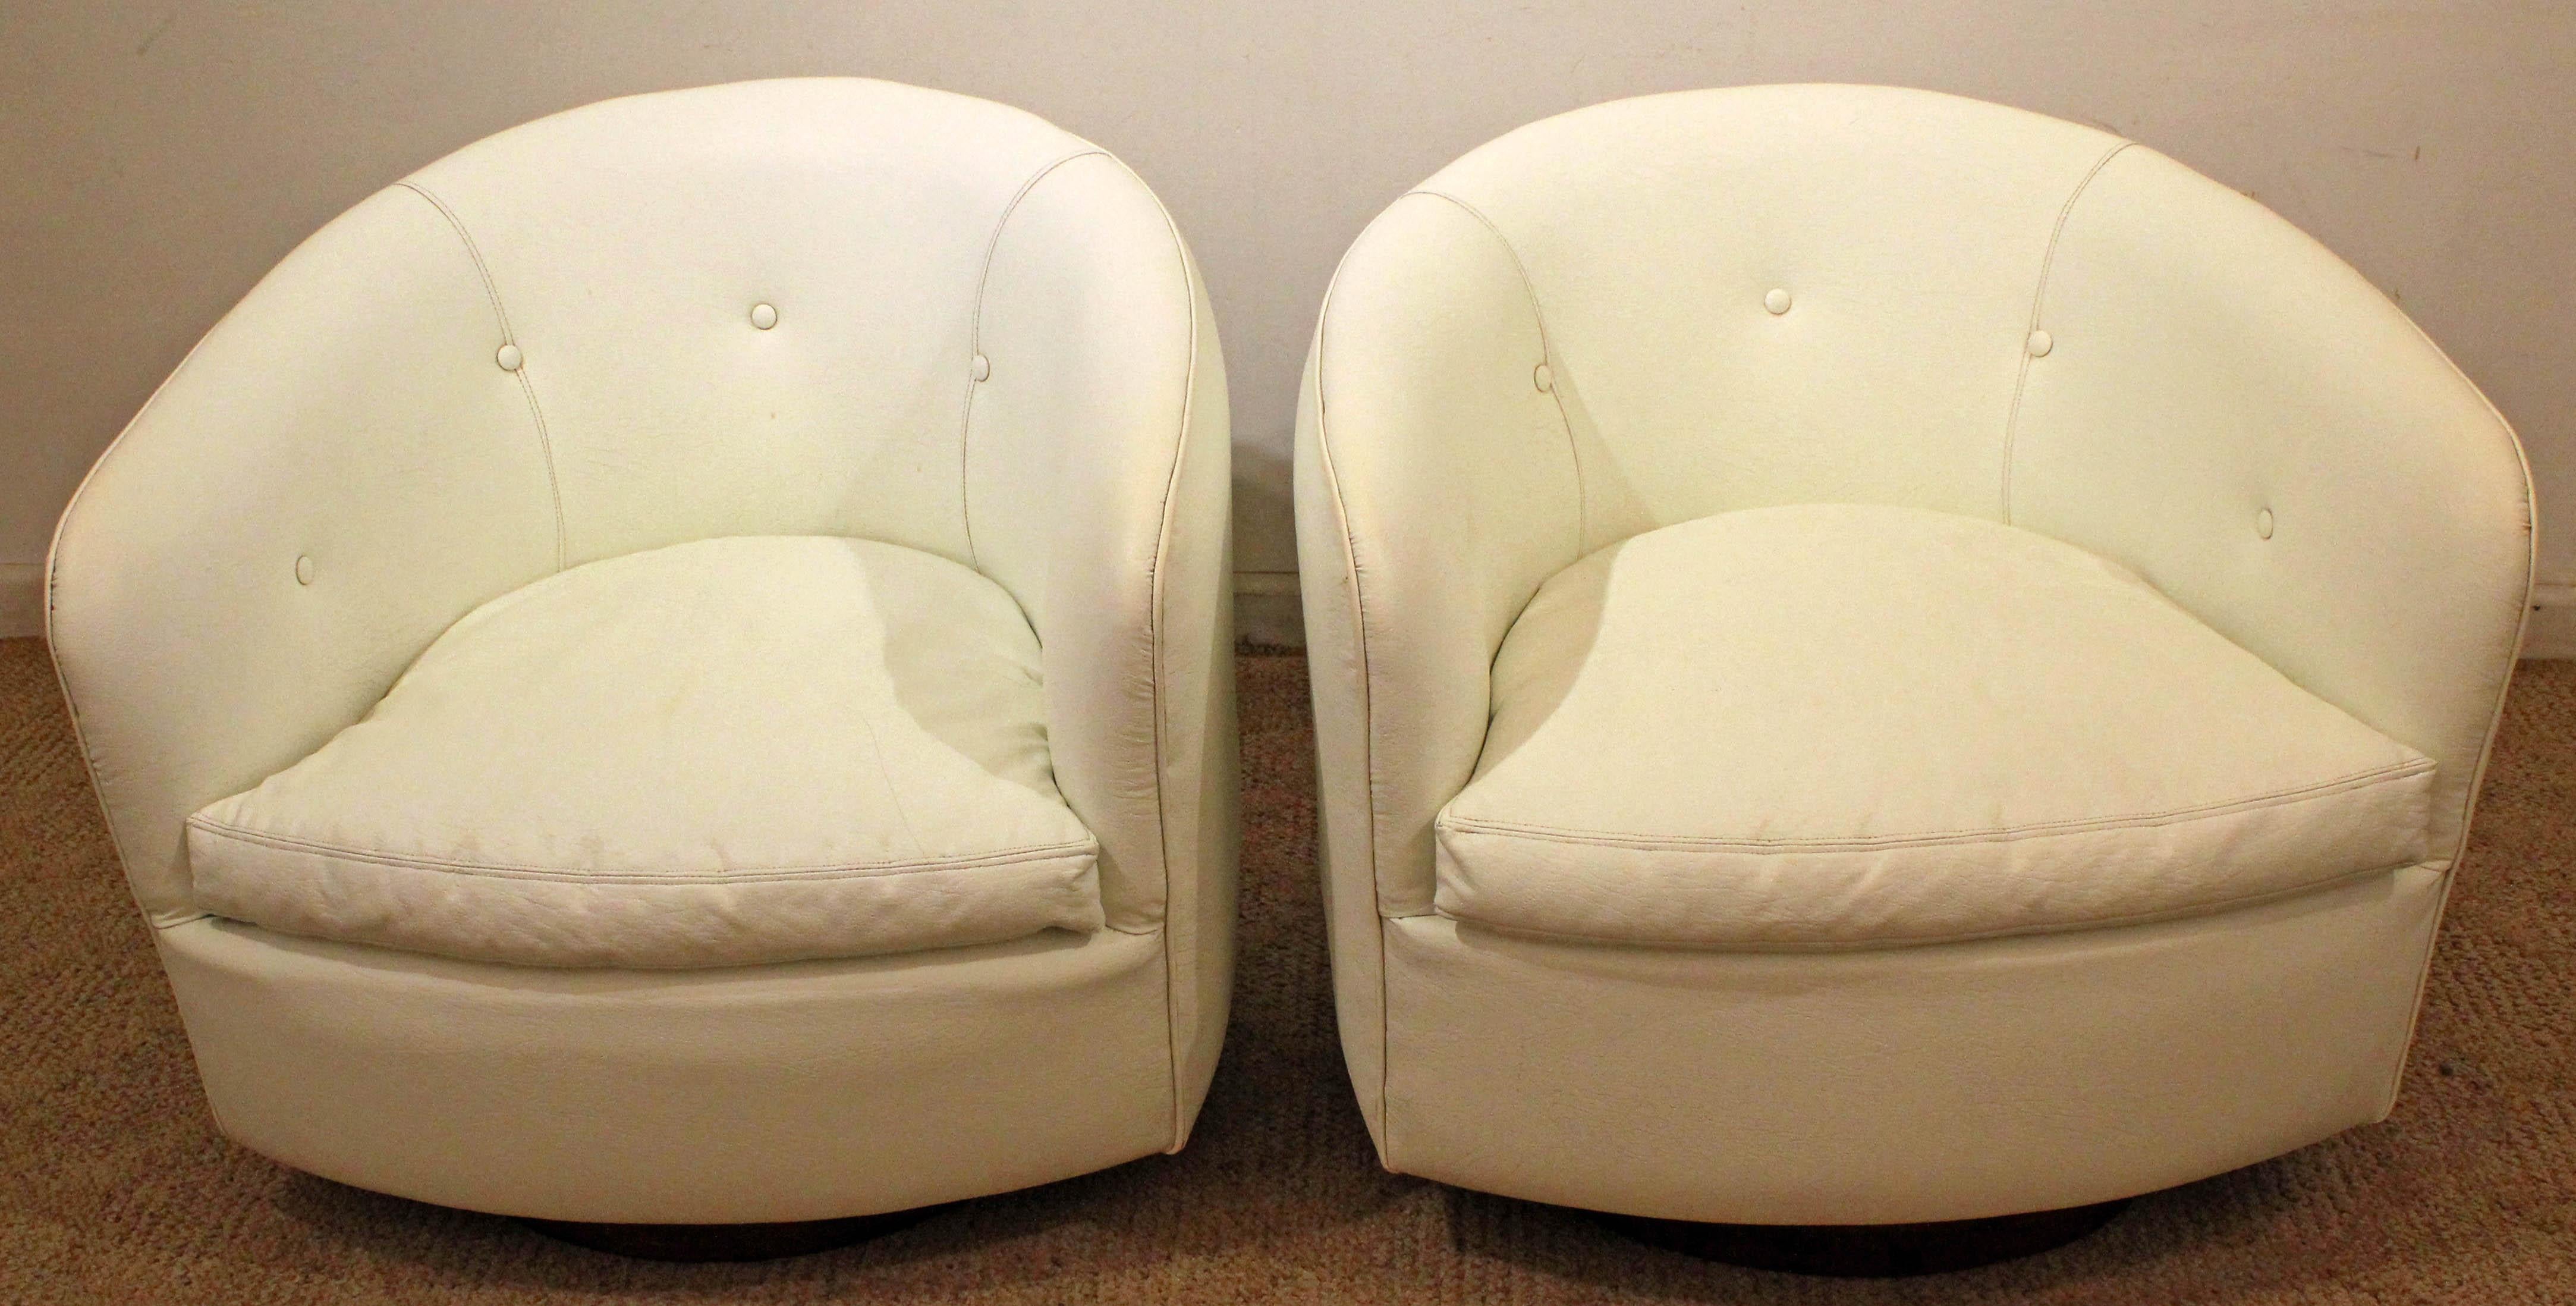 What a find. Offered is a pair of Mid-Century Modern swivel chairs, designed by Milo Baughman for Thayer Coggin. This set has the ability to swivel and tilt with a round walnut base. Features its original white vinyl upholstery. They are signed by